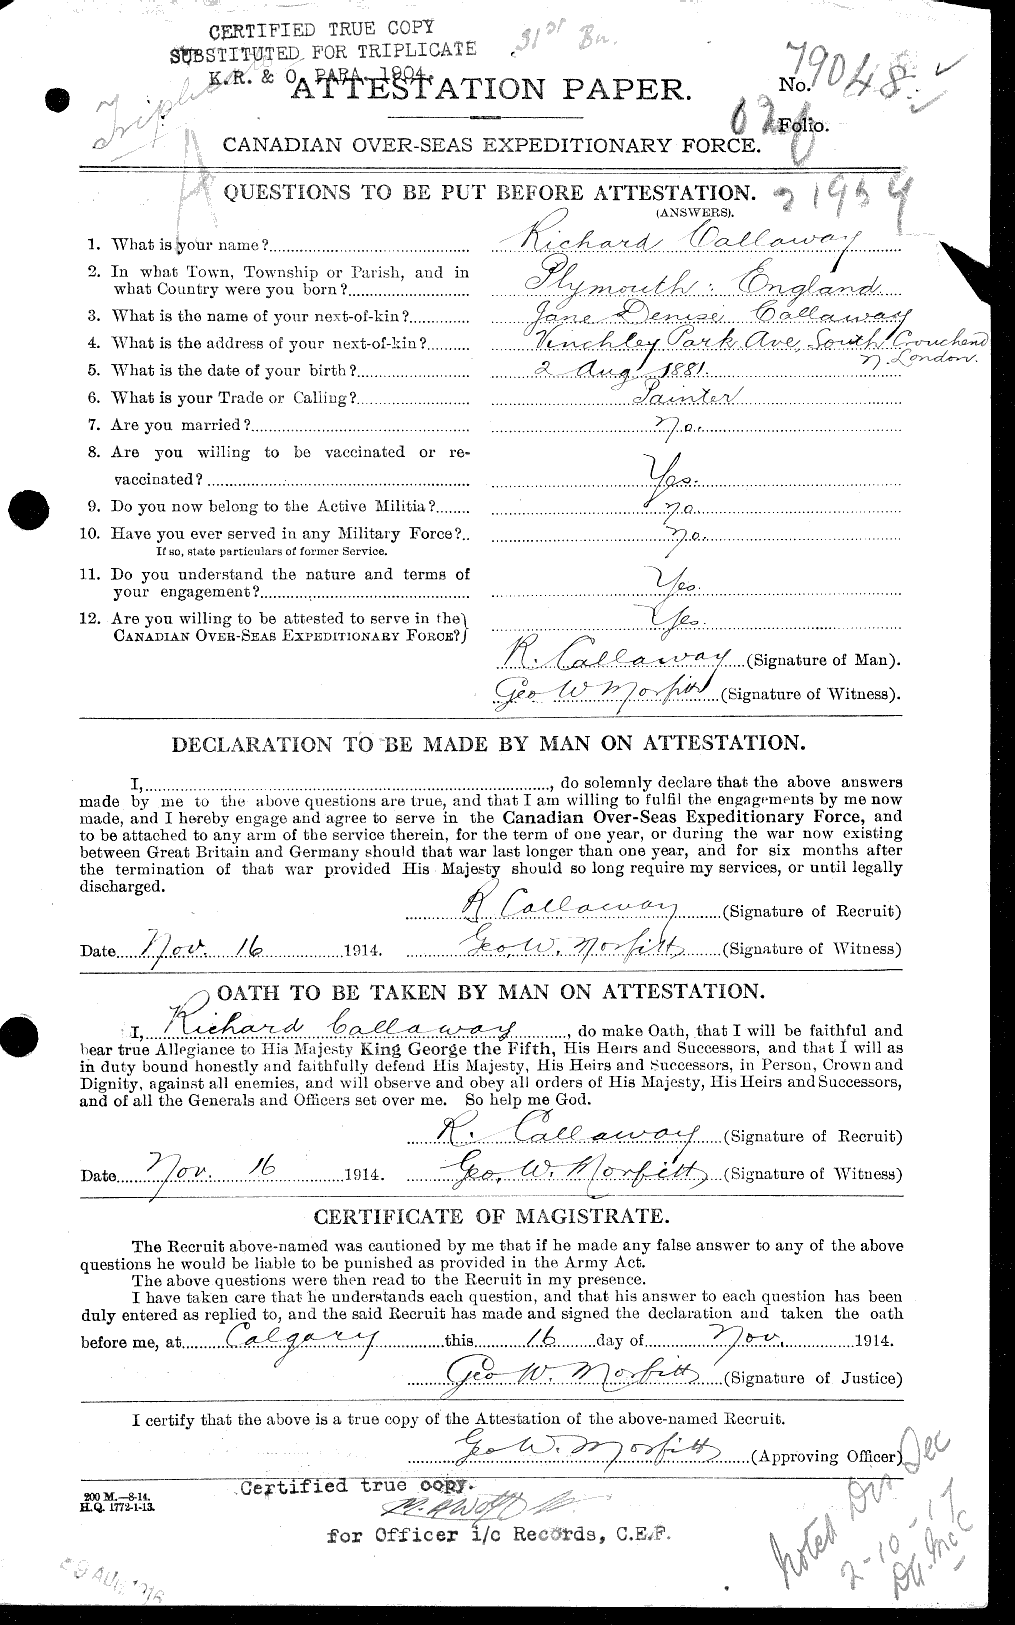 Personnel Records of the First World War - CEF 002033a